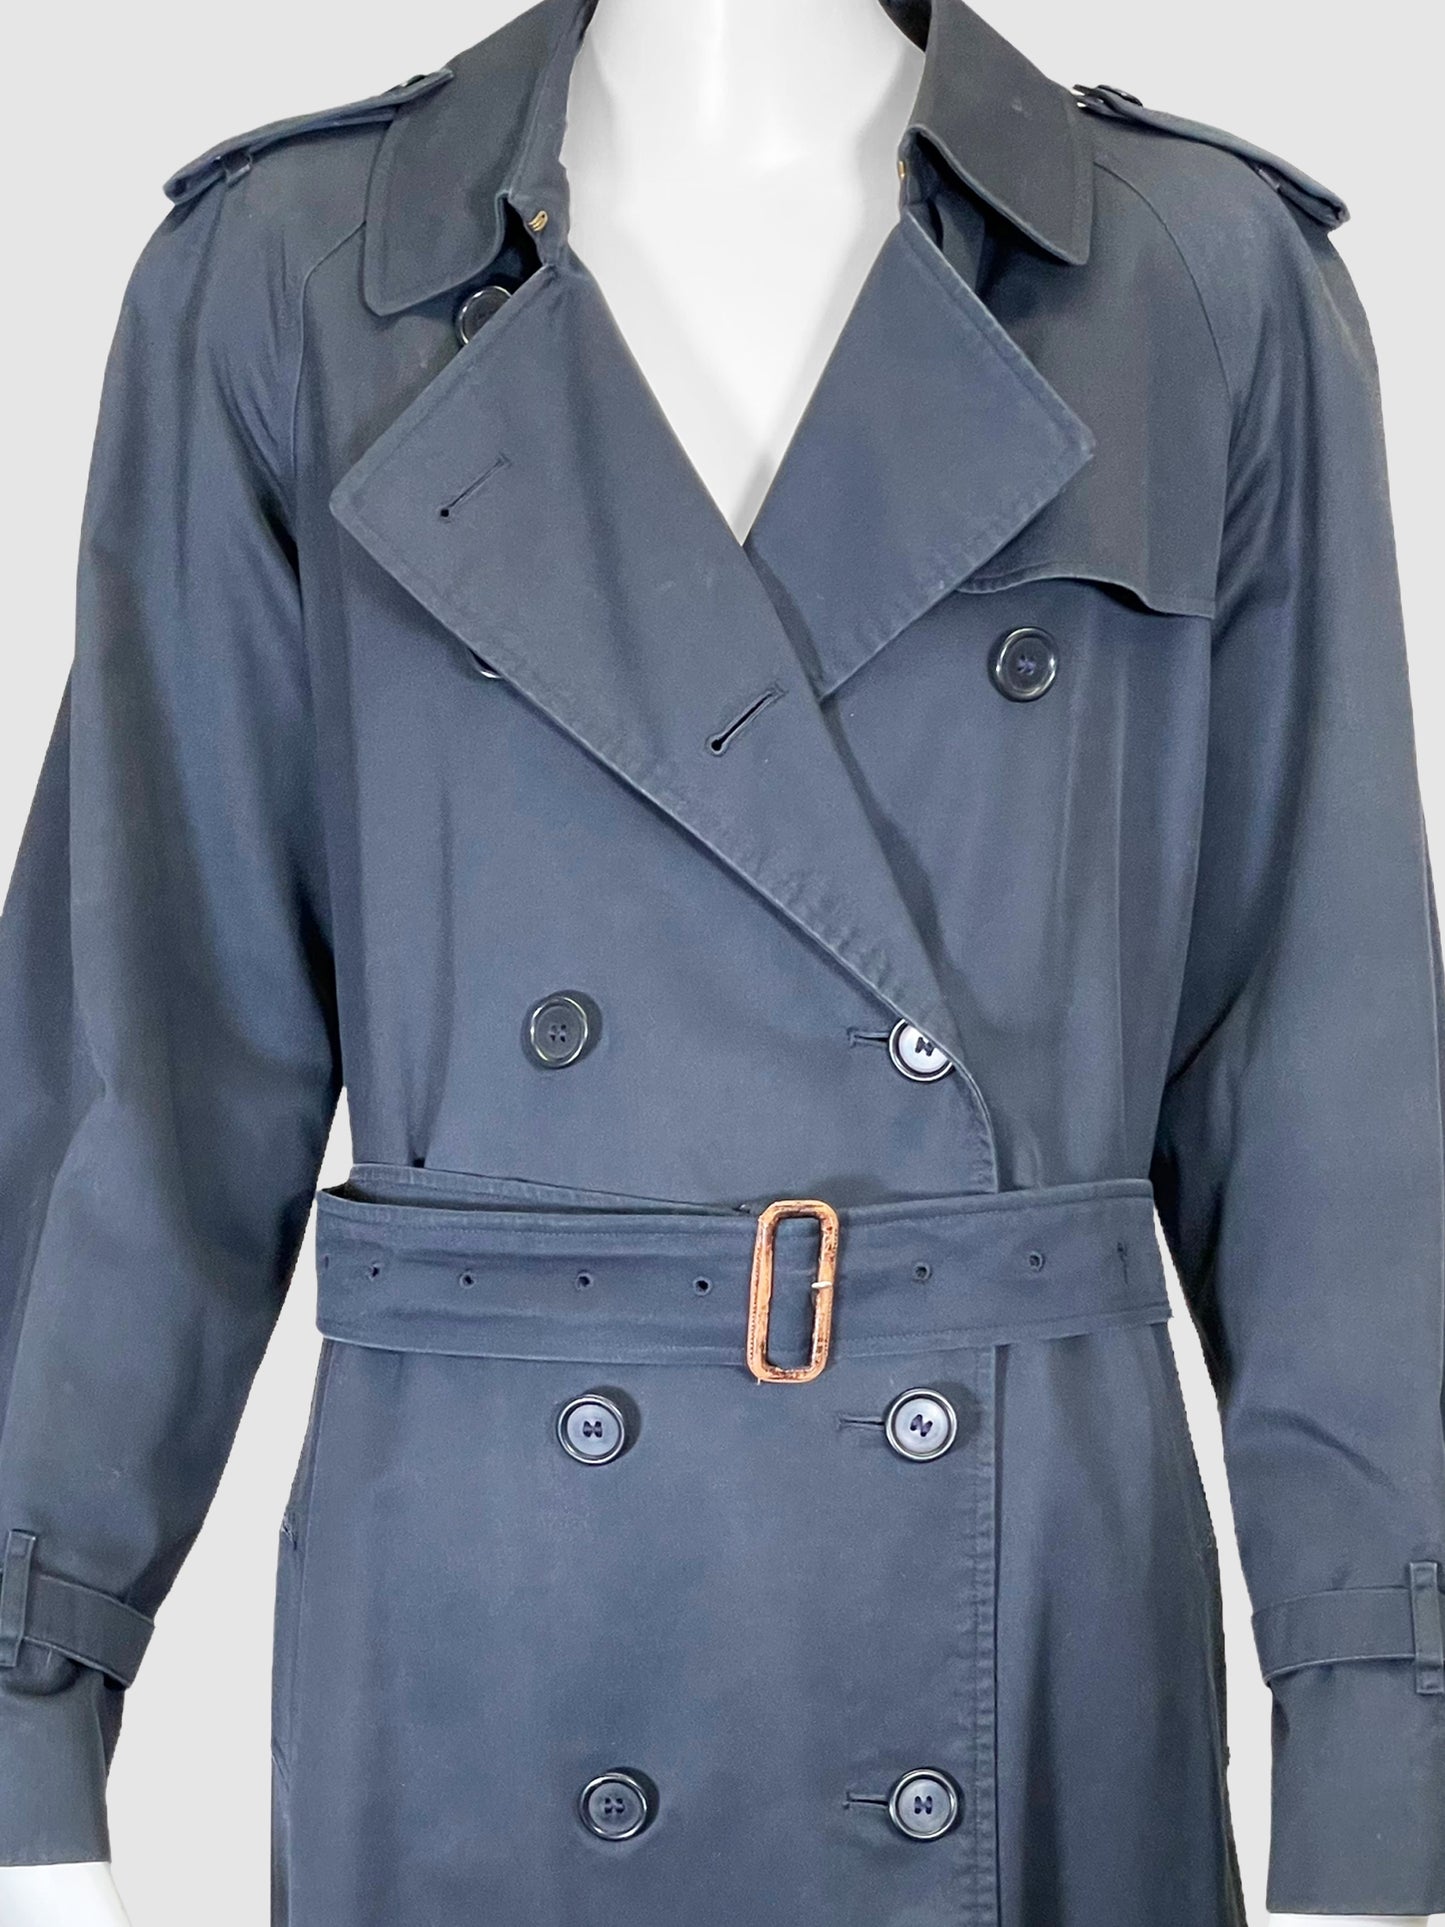 Double-Breasted Trench Coat - Size M